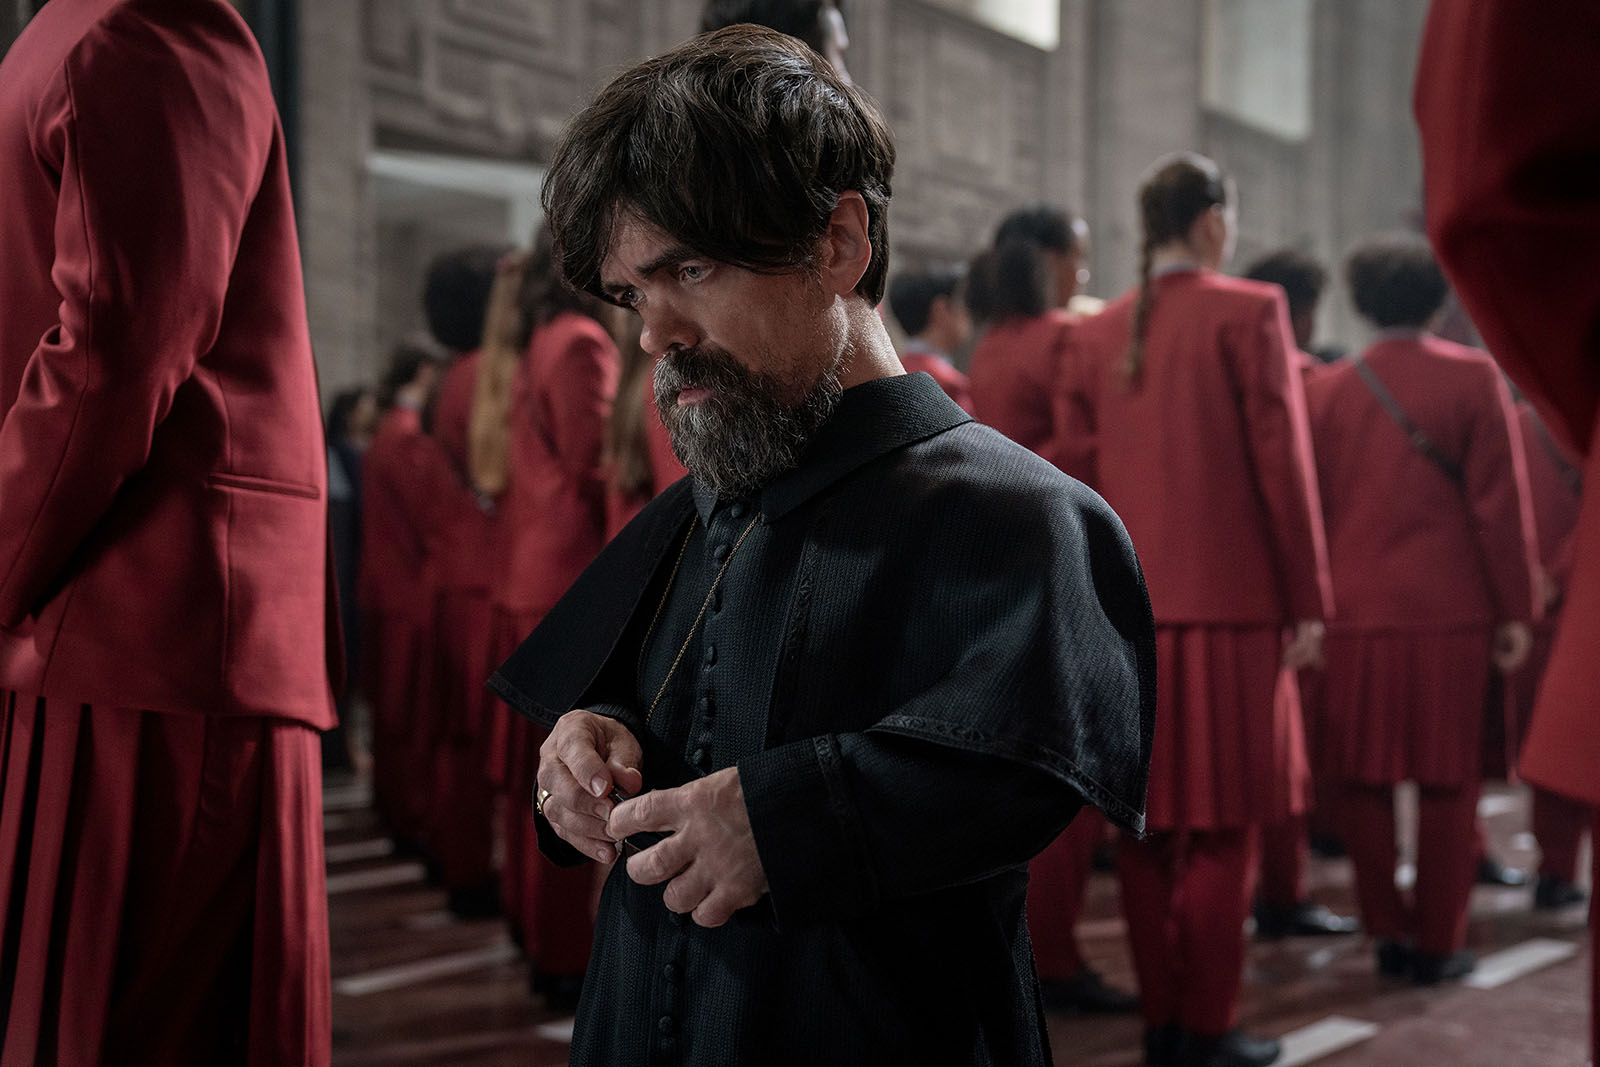 Peter Dinklage plays the devious Casca Highbottom, the creator of The Hunger Games. Image © Lionsgate